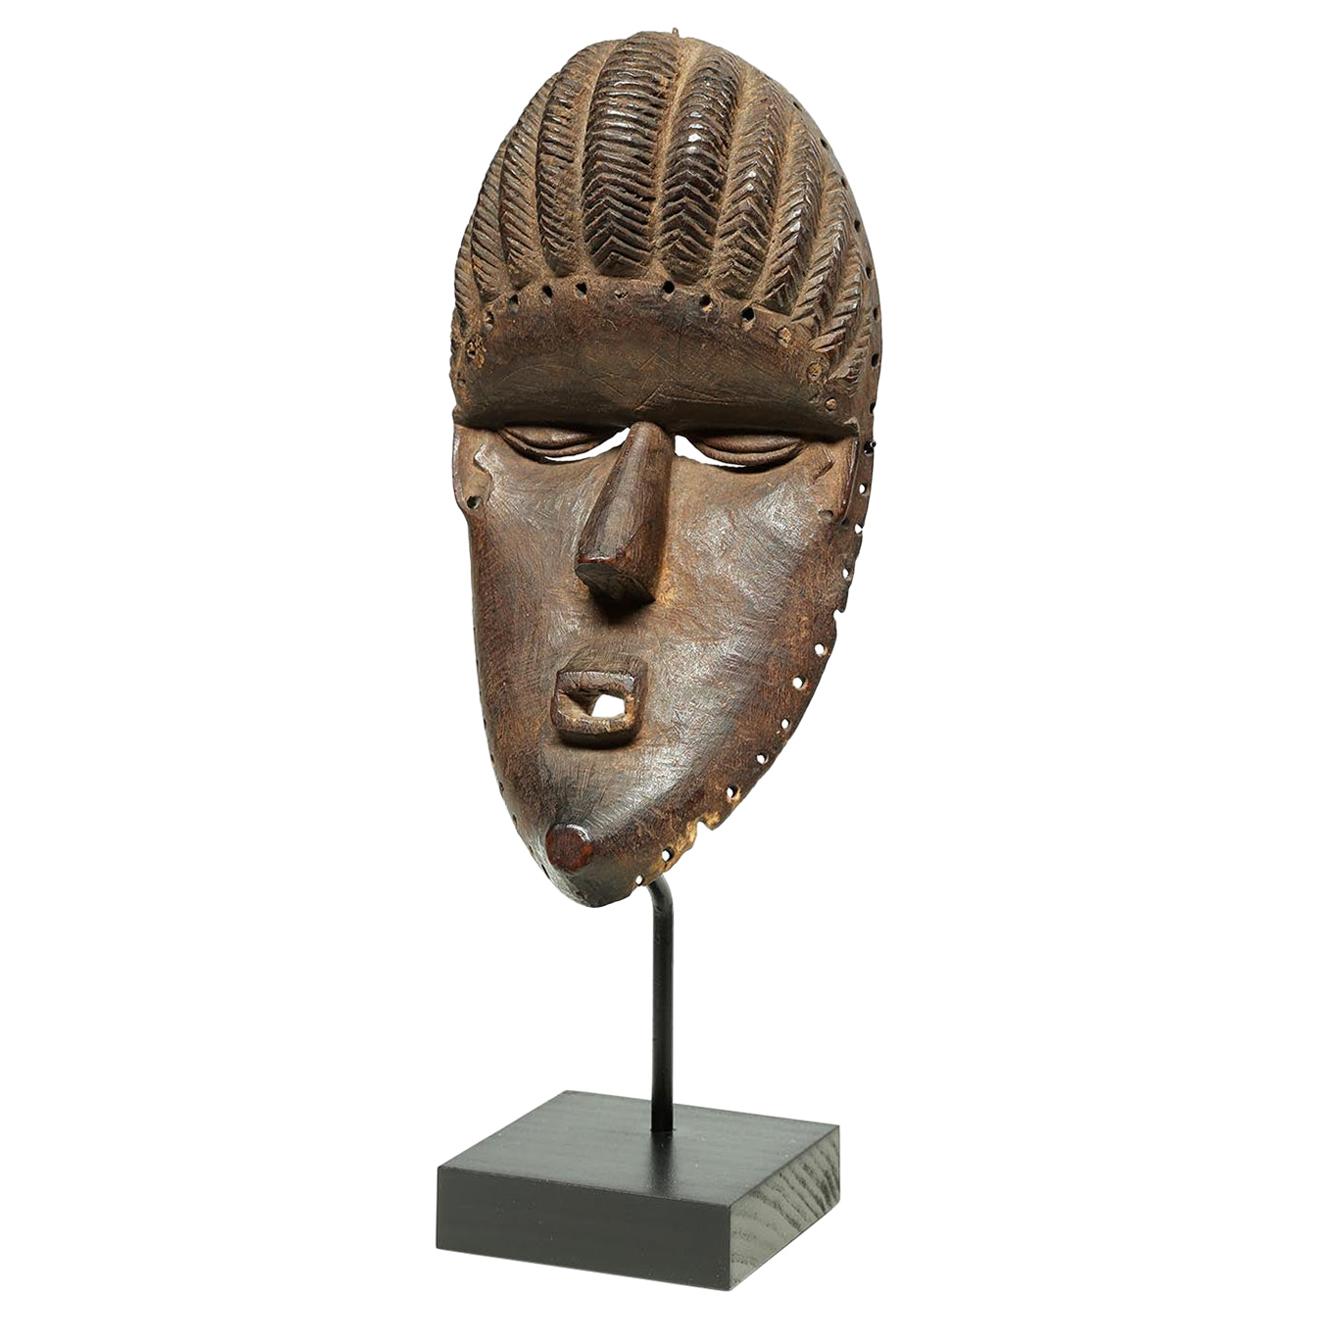 Bassa Tribal Wood Dance Mask with Geometric Features, Early 20th Century, Africa